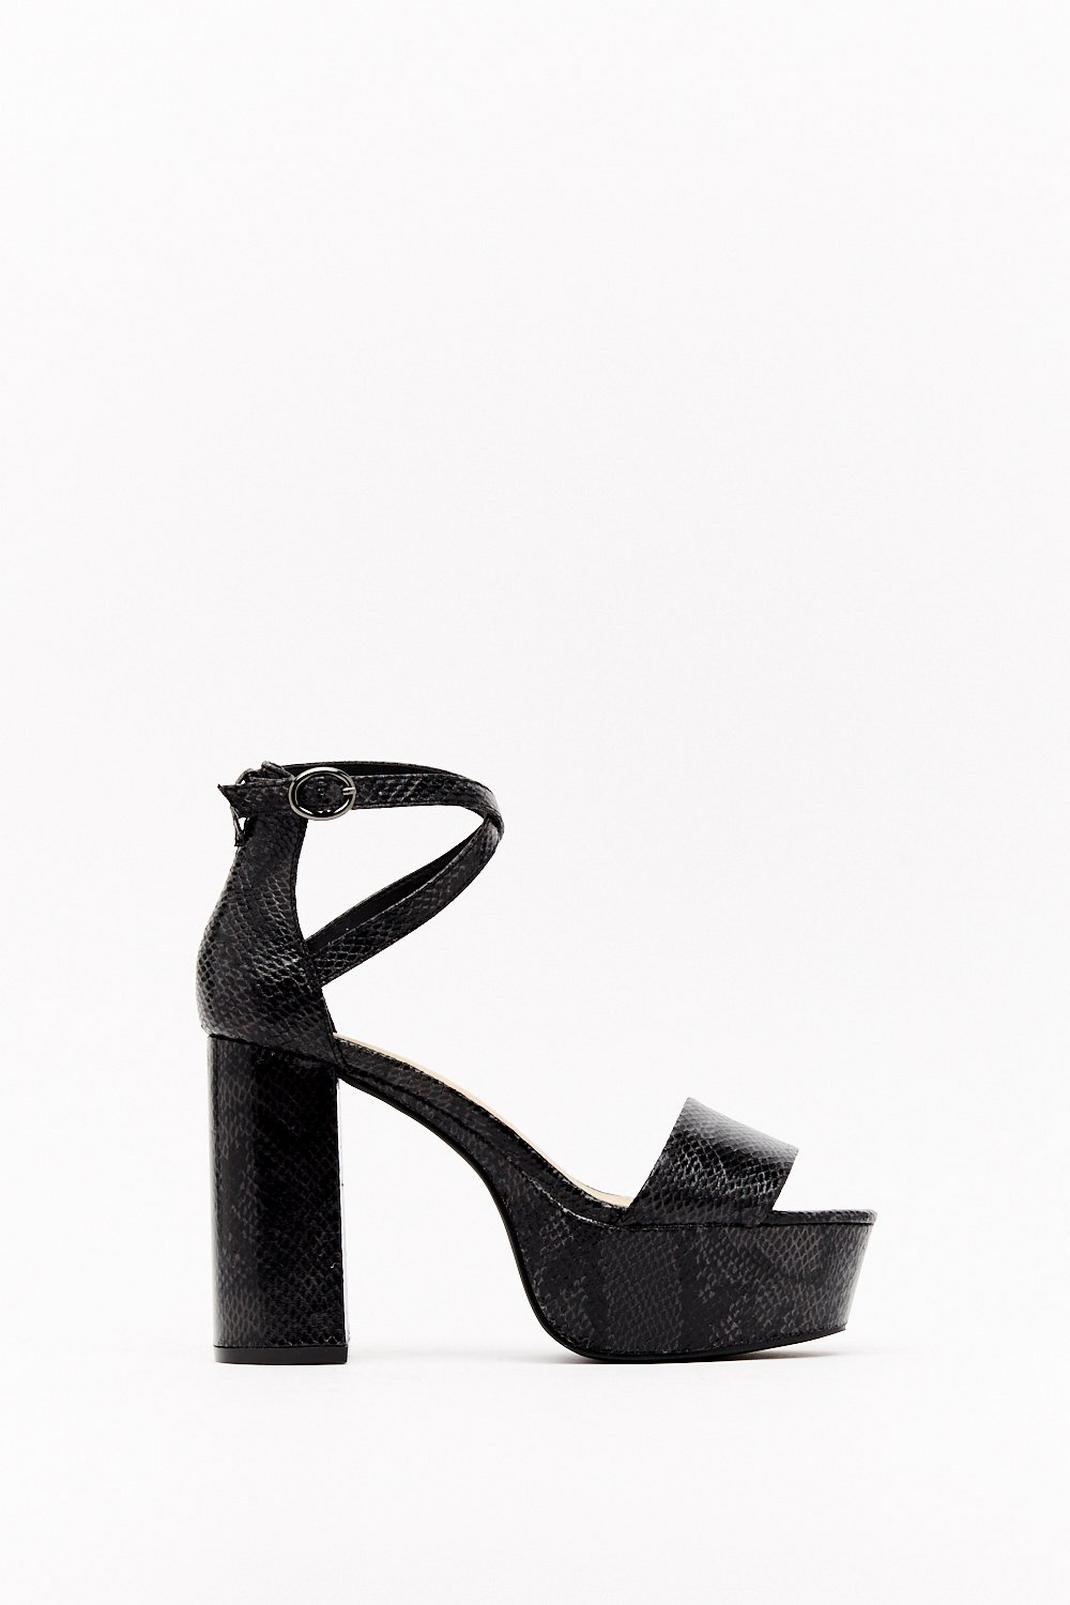 Snake It to the Limit Faux Leather Platform Heels image number 1